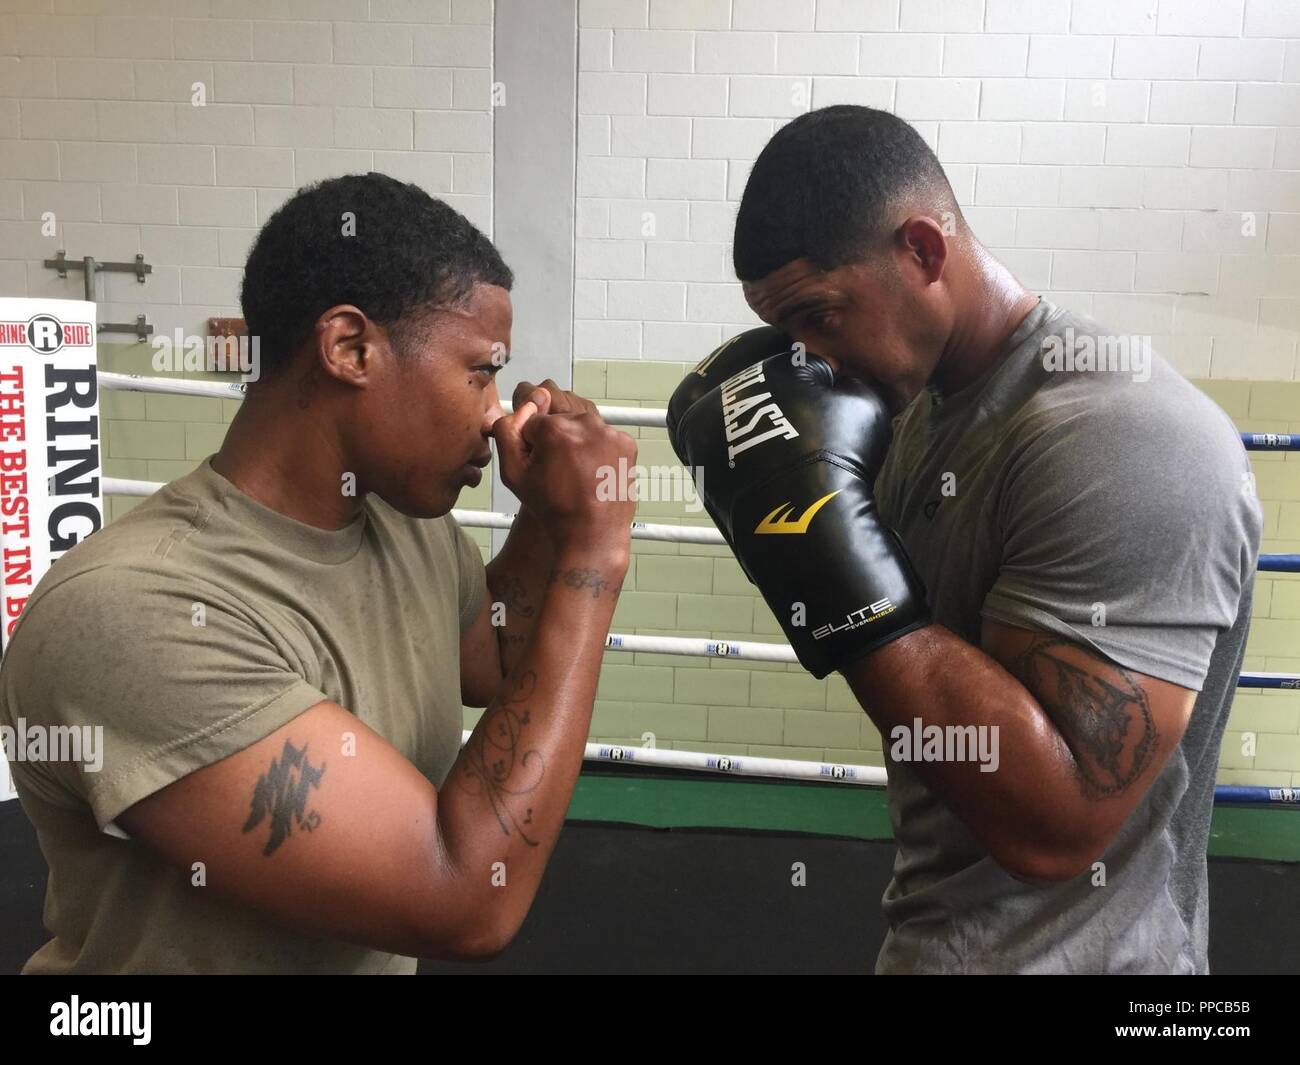 April Moreland-Beason, left, Marvin Carey and Marcus Dorval (not pictured) are headed to Fort Huachuca, Arizona, next week to try out for spots on the All-Army boxing team. Carey is looking for a spot on the team's roster as a fighter, Moreland-Beason a coach. Stock Photo